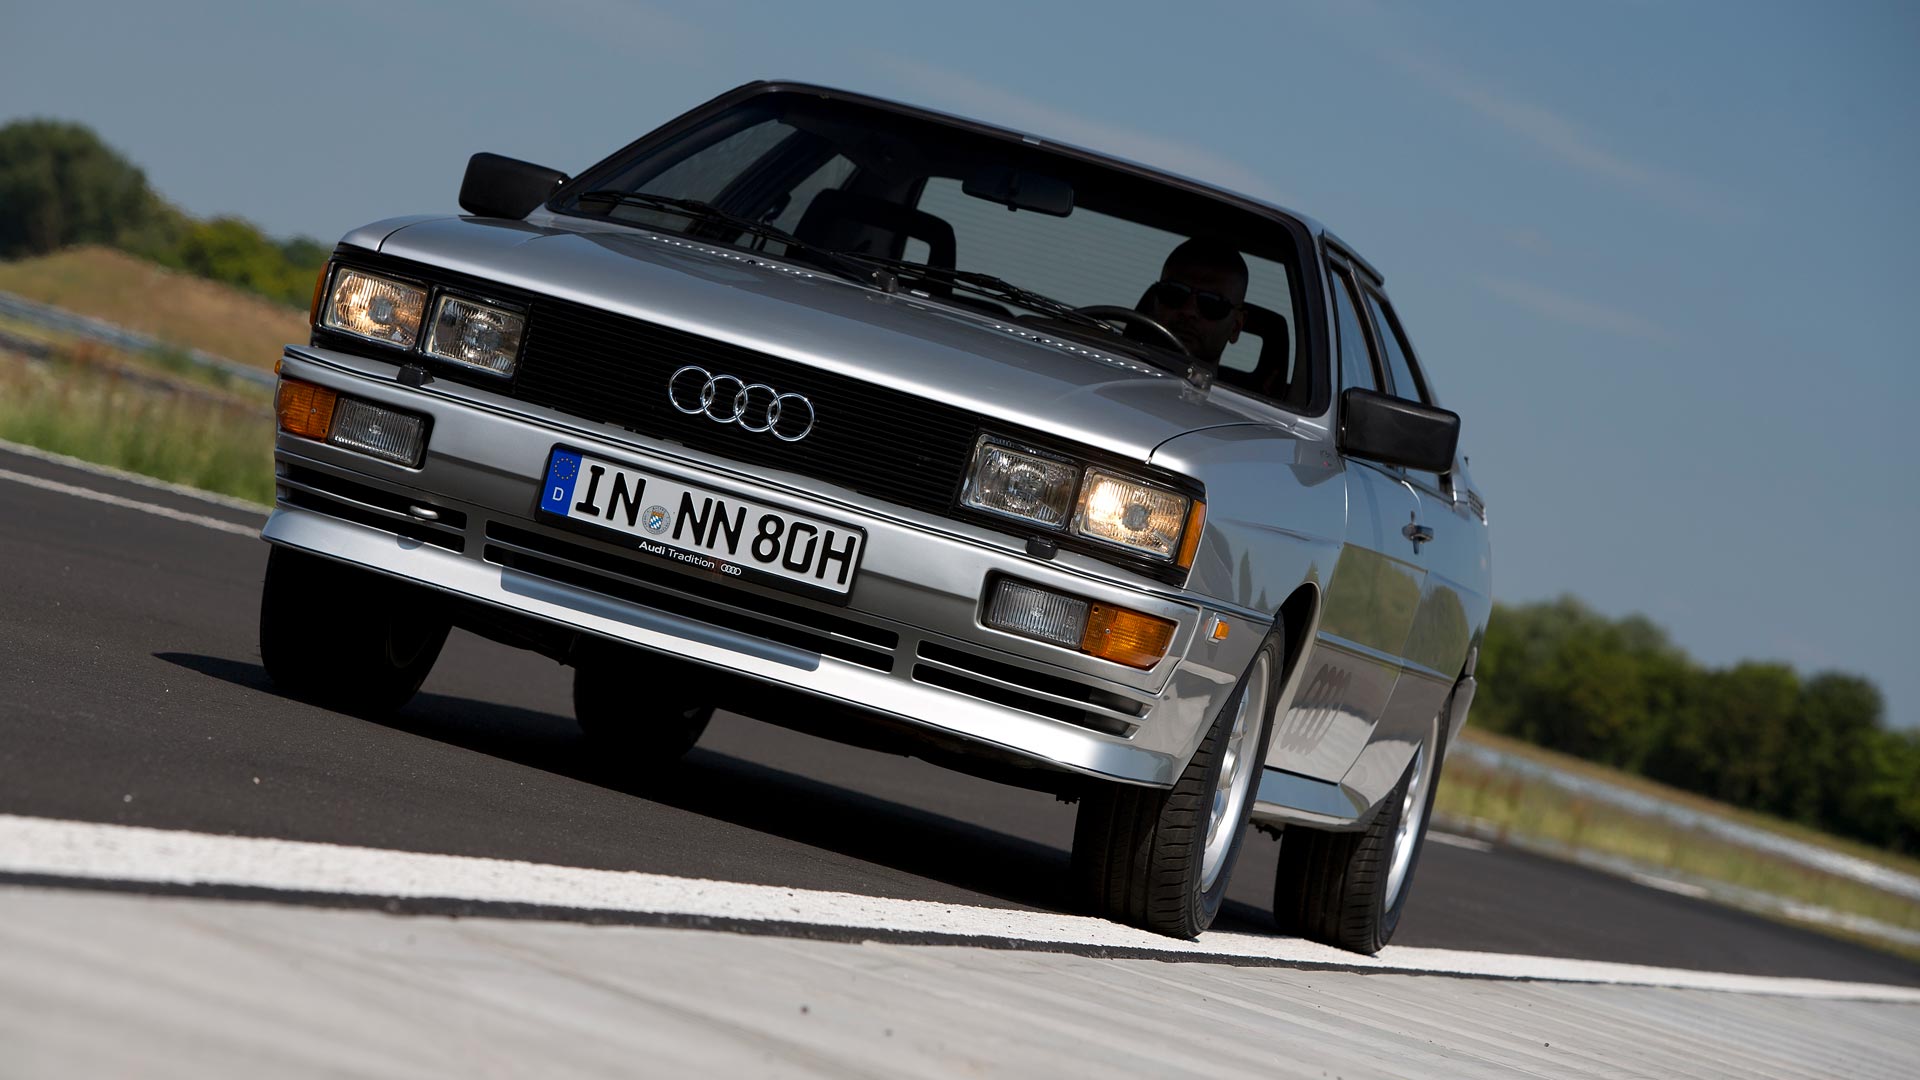 Classic car market winners and losers